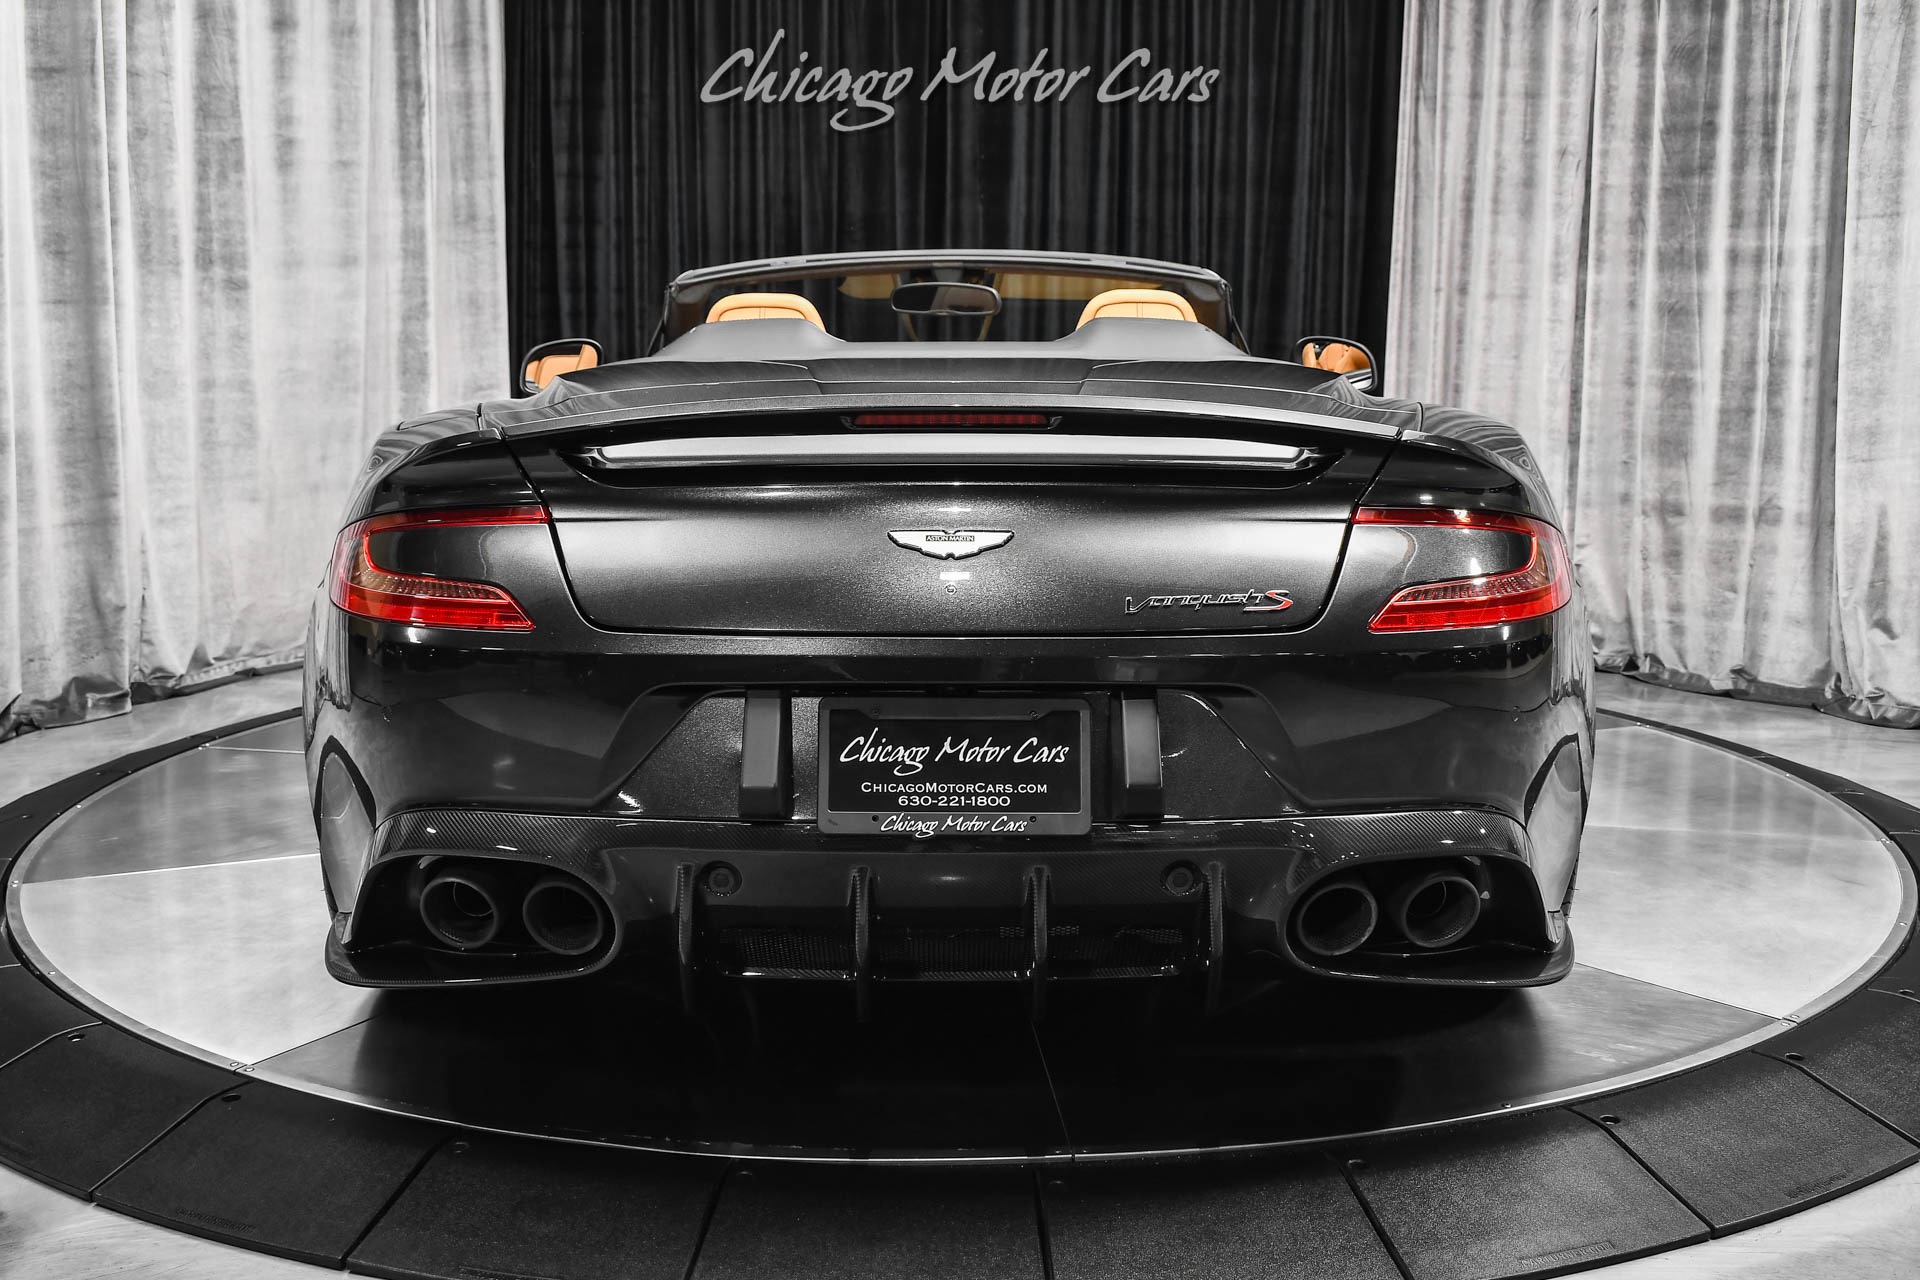 Used-2018-Aston-Martin-Vanquish-S-Orignal-MSRP-345604-Only-1300-Miles-Annual-Service-Just-Completed